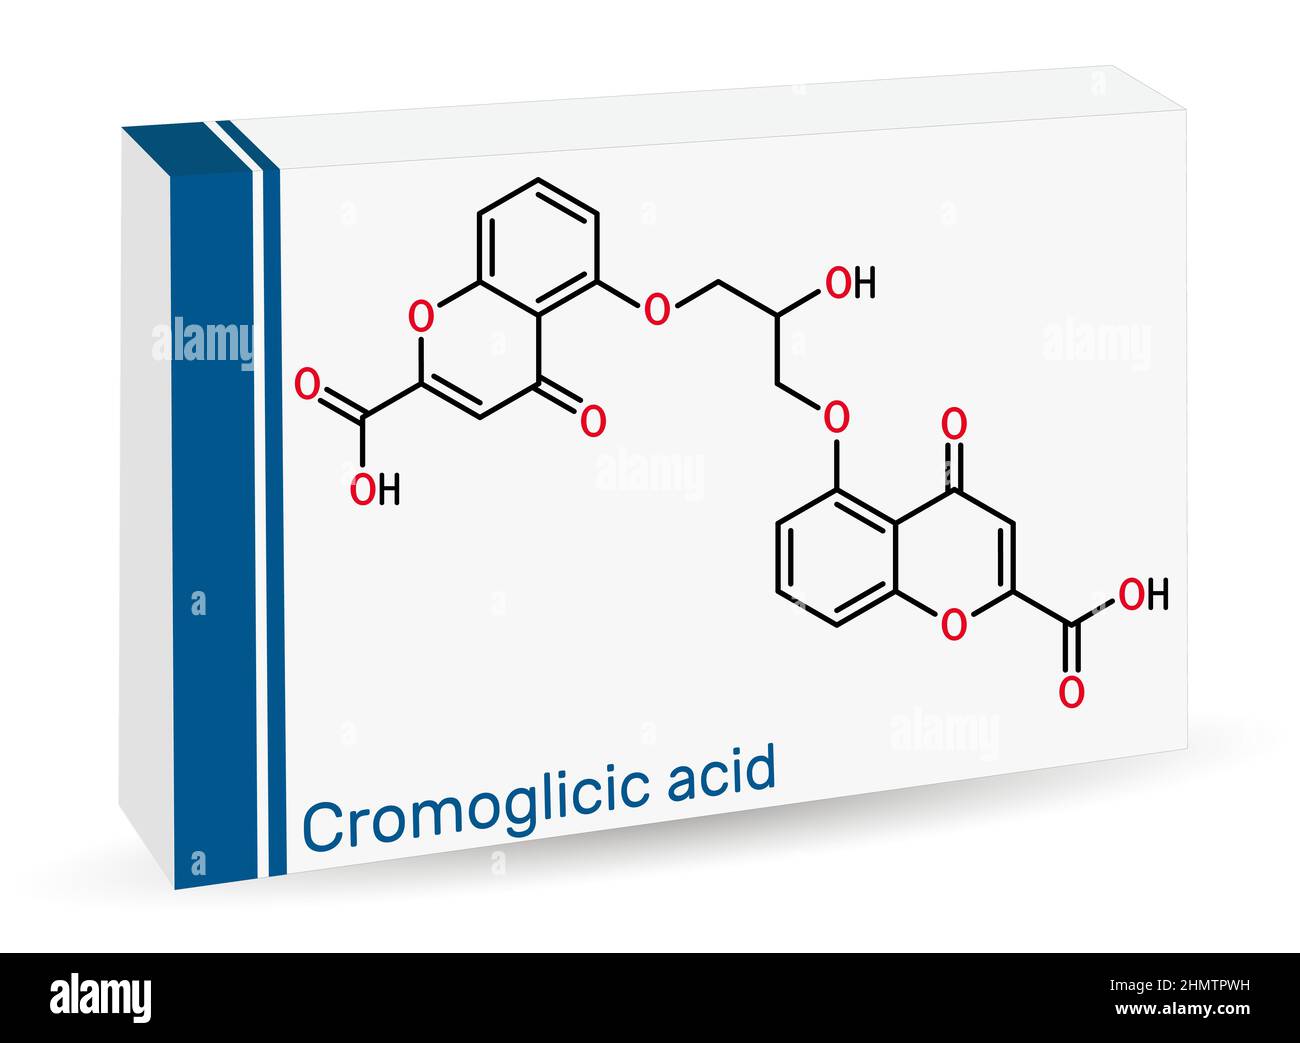 Cromoglicic acid, cromolyn, cromoglycate, cromoglicate molecule. It is antihistamine medication used to treat asthma, allergic reactions of the eyes a Stock Vector